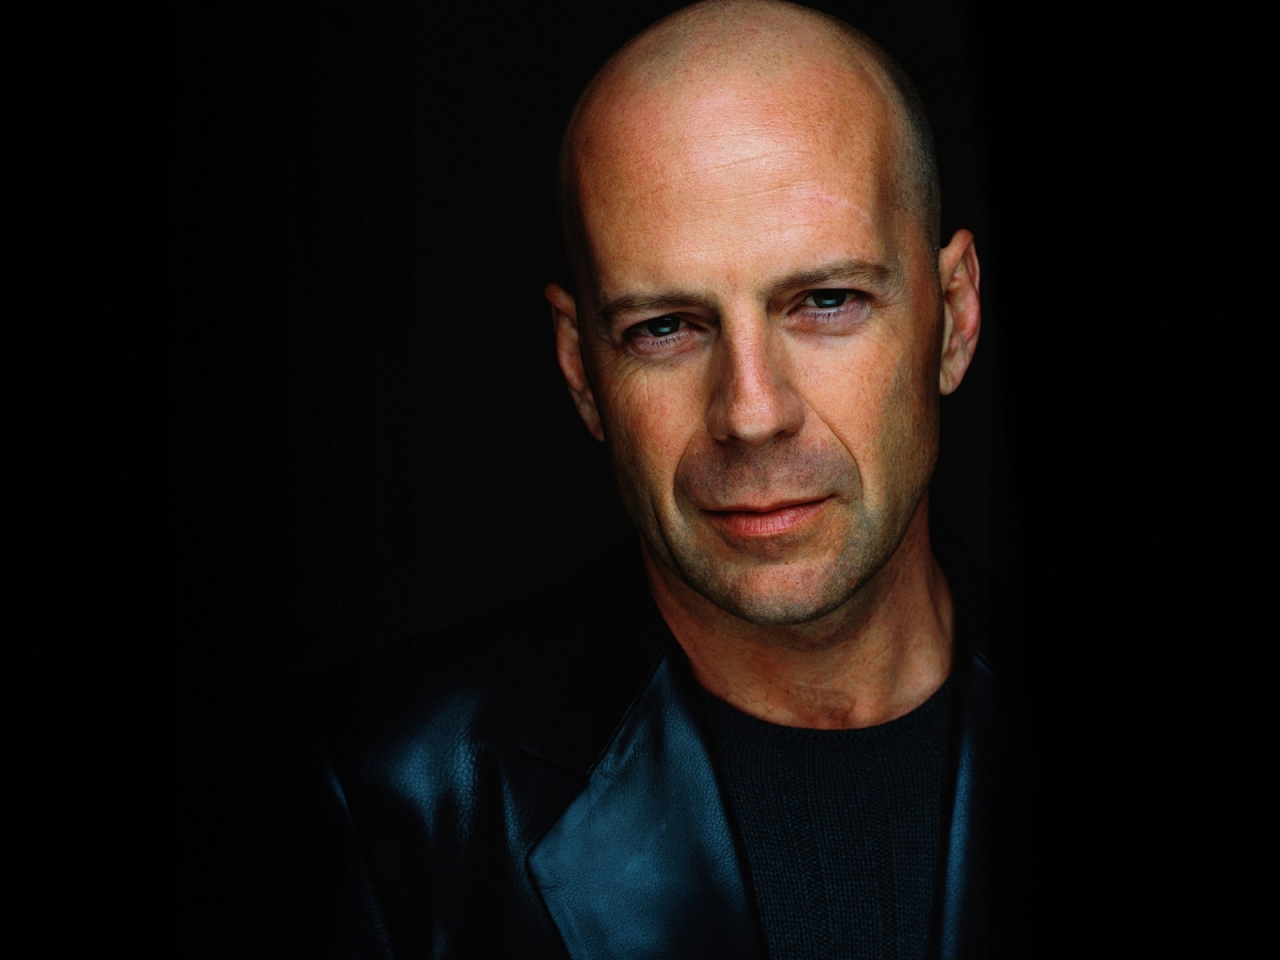 Bruce Willis Profile Look for 1280 x 960 resolution